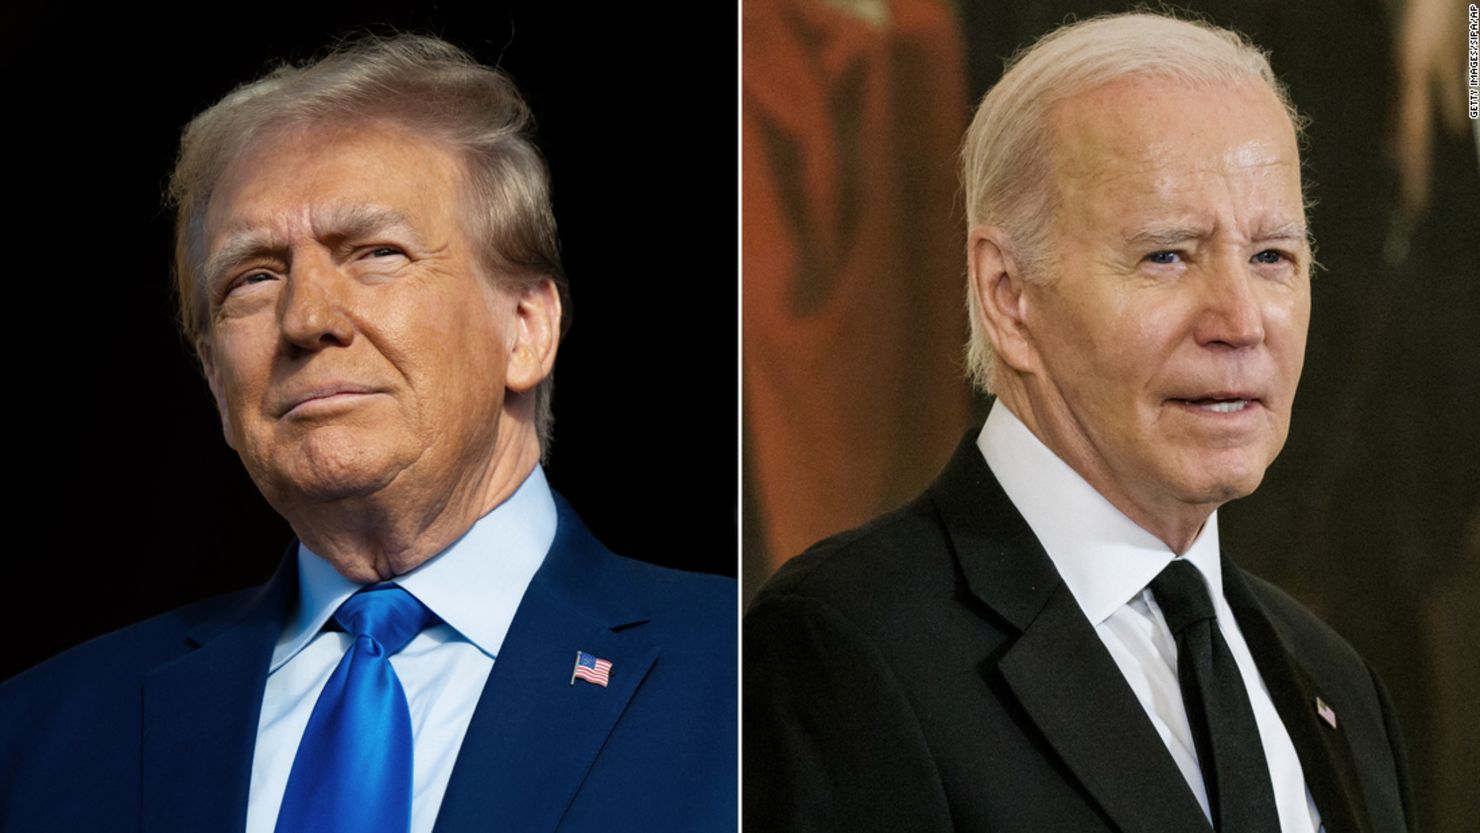 The 2024 election will likely be a rematch between Donald Trump and President Biden.